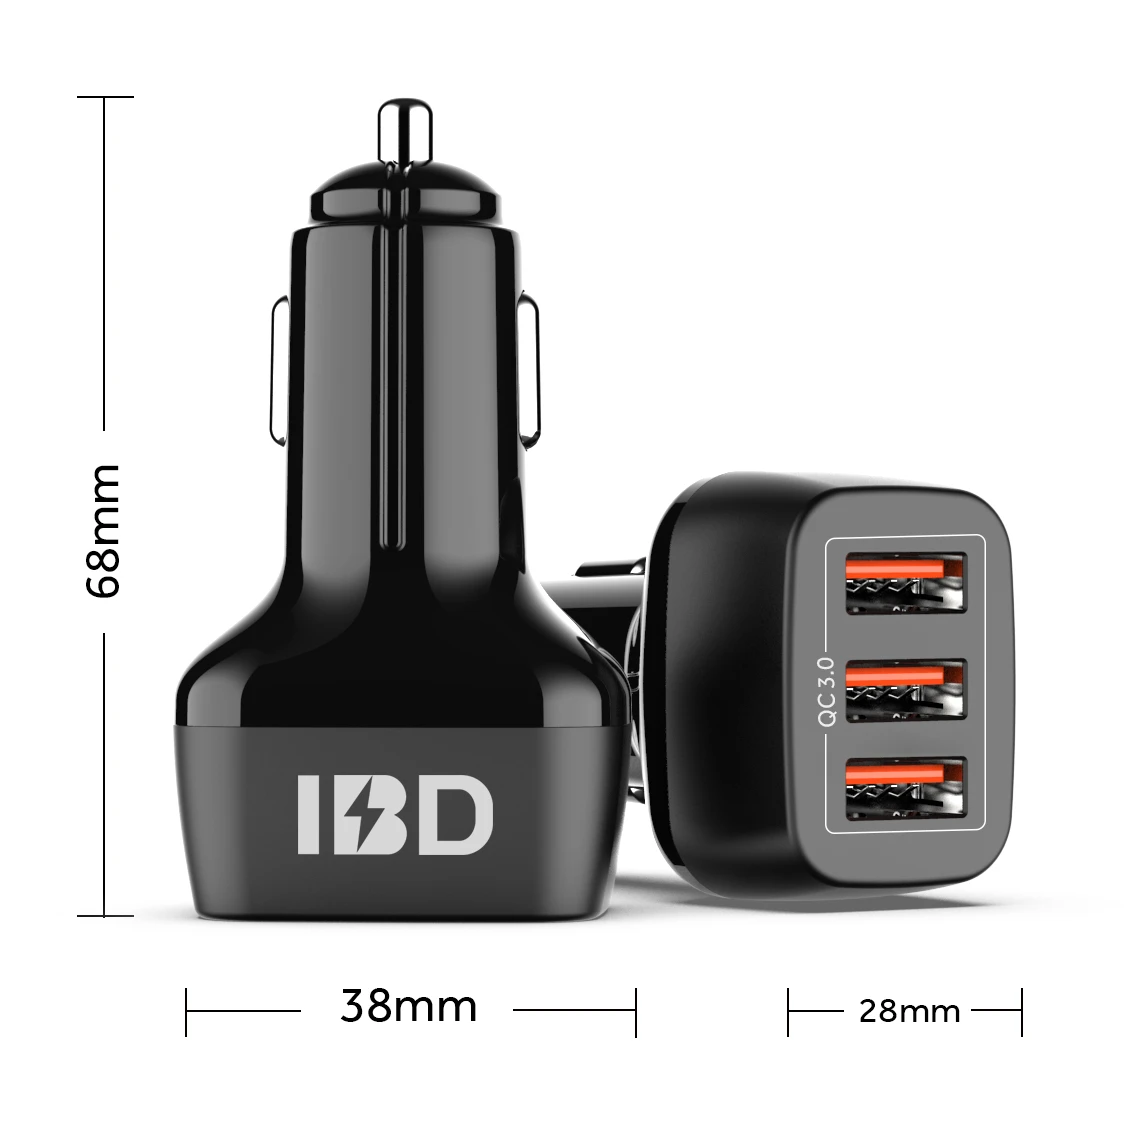 2020 Factory Newest Products Ibd Car Usb Charger 54W, Electric 3 Usb  Port Quick Charge 3.0 Car Charger